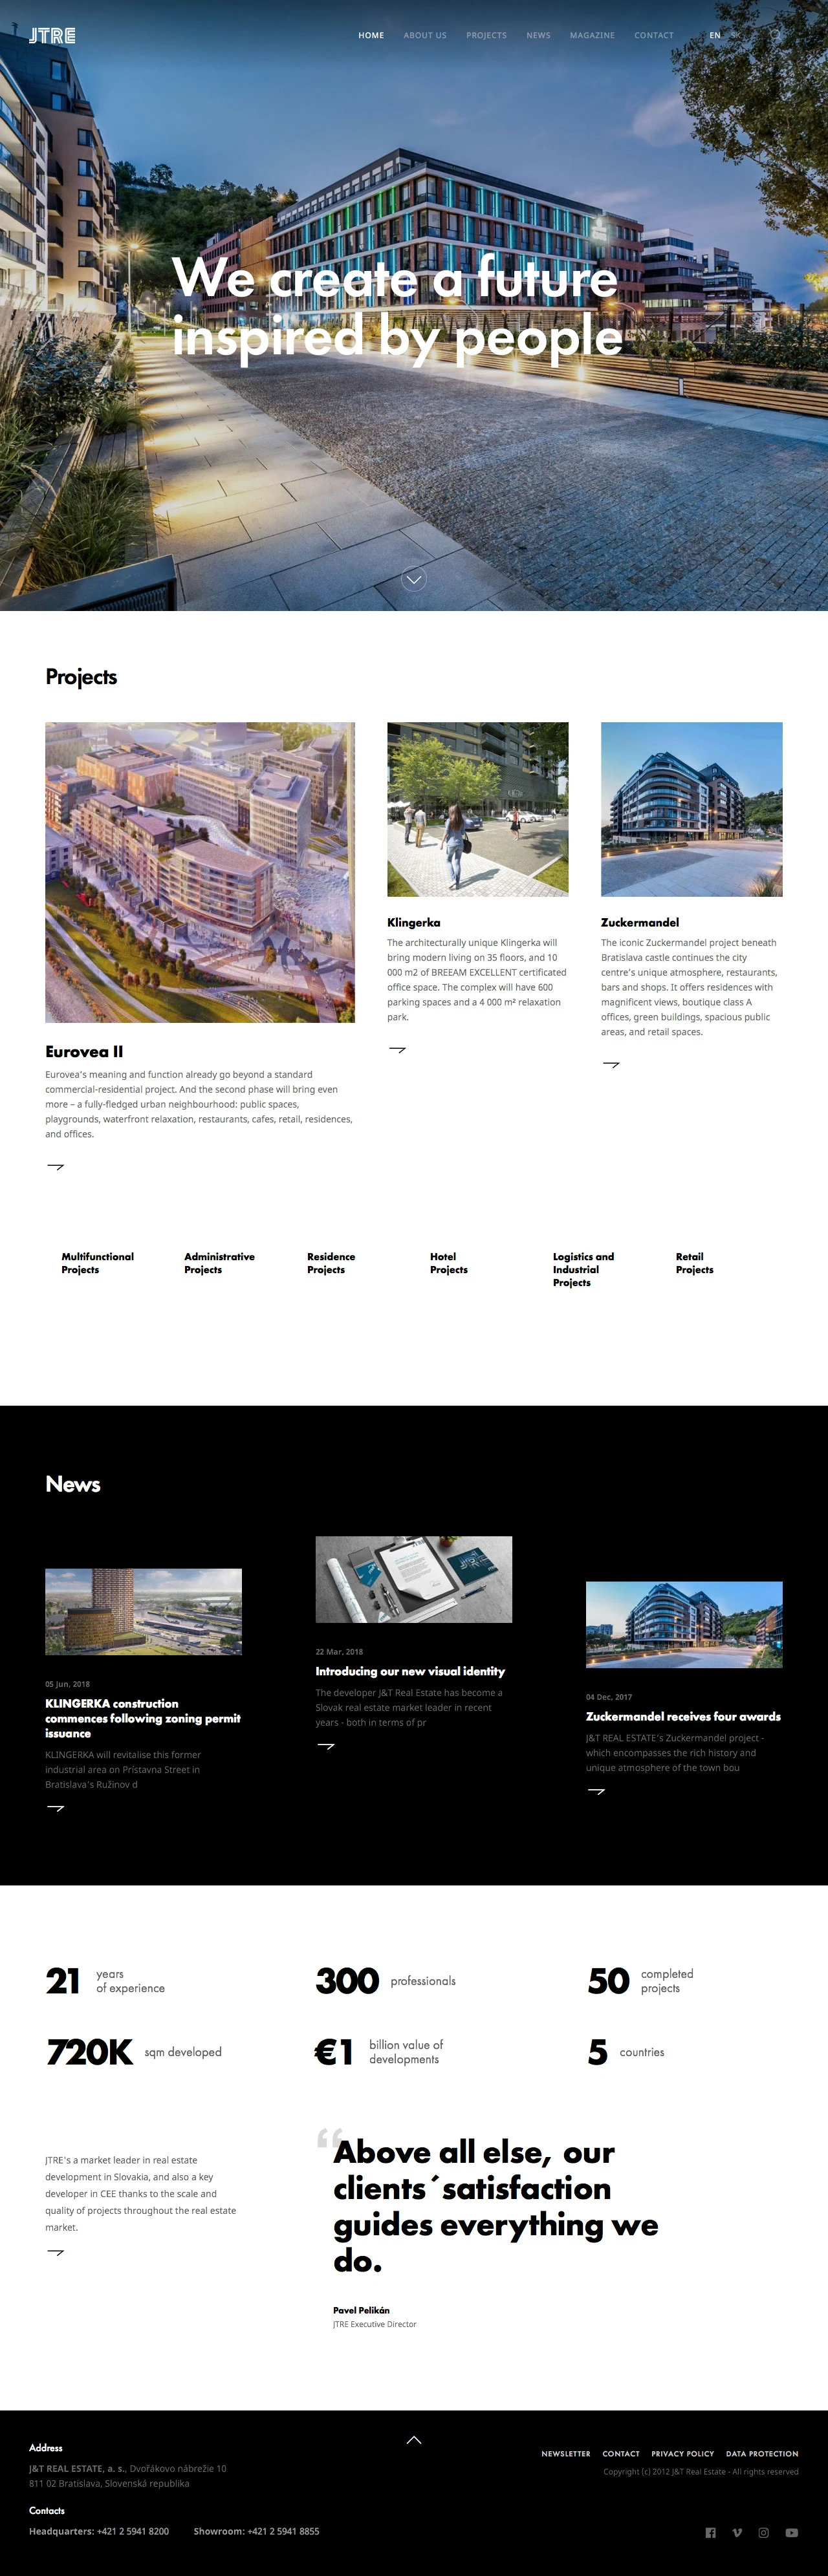 J&T Real Estate Landing Page Example: The company has over 21 years' experience and know-how, over 300 employees, registered offices in three countries and projects in five